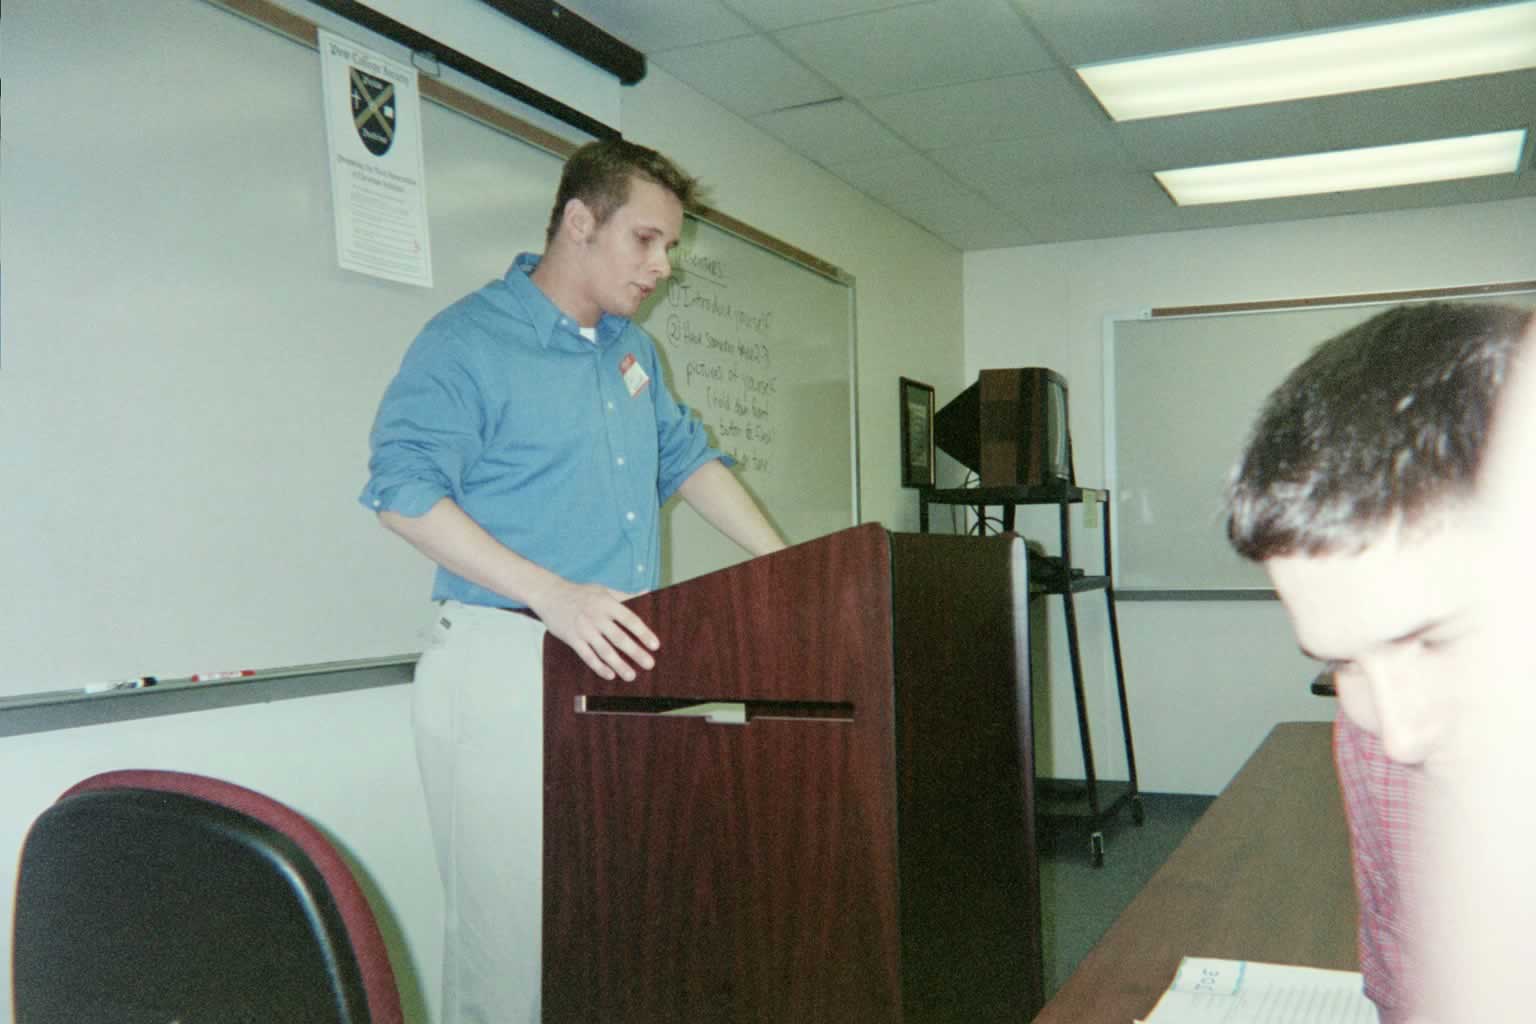 picture of a man in a blue shirt standing behind a podium speaking